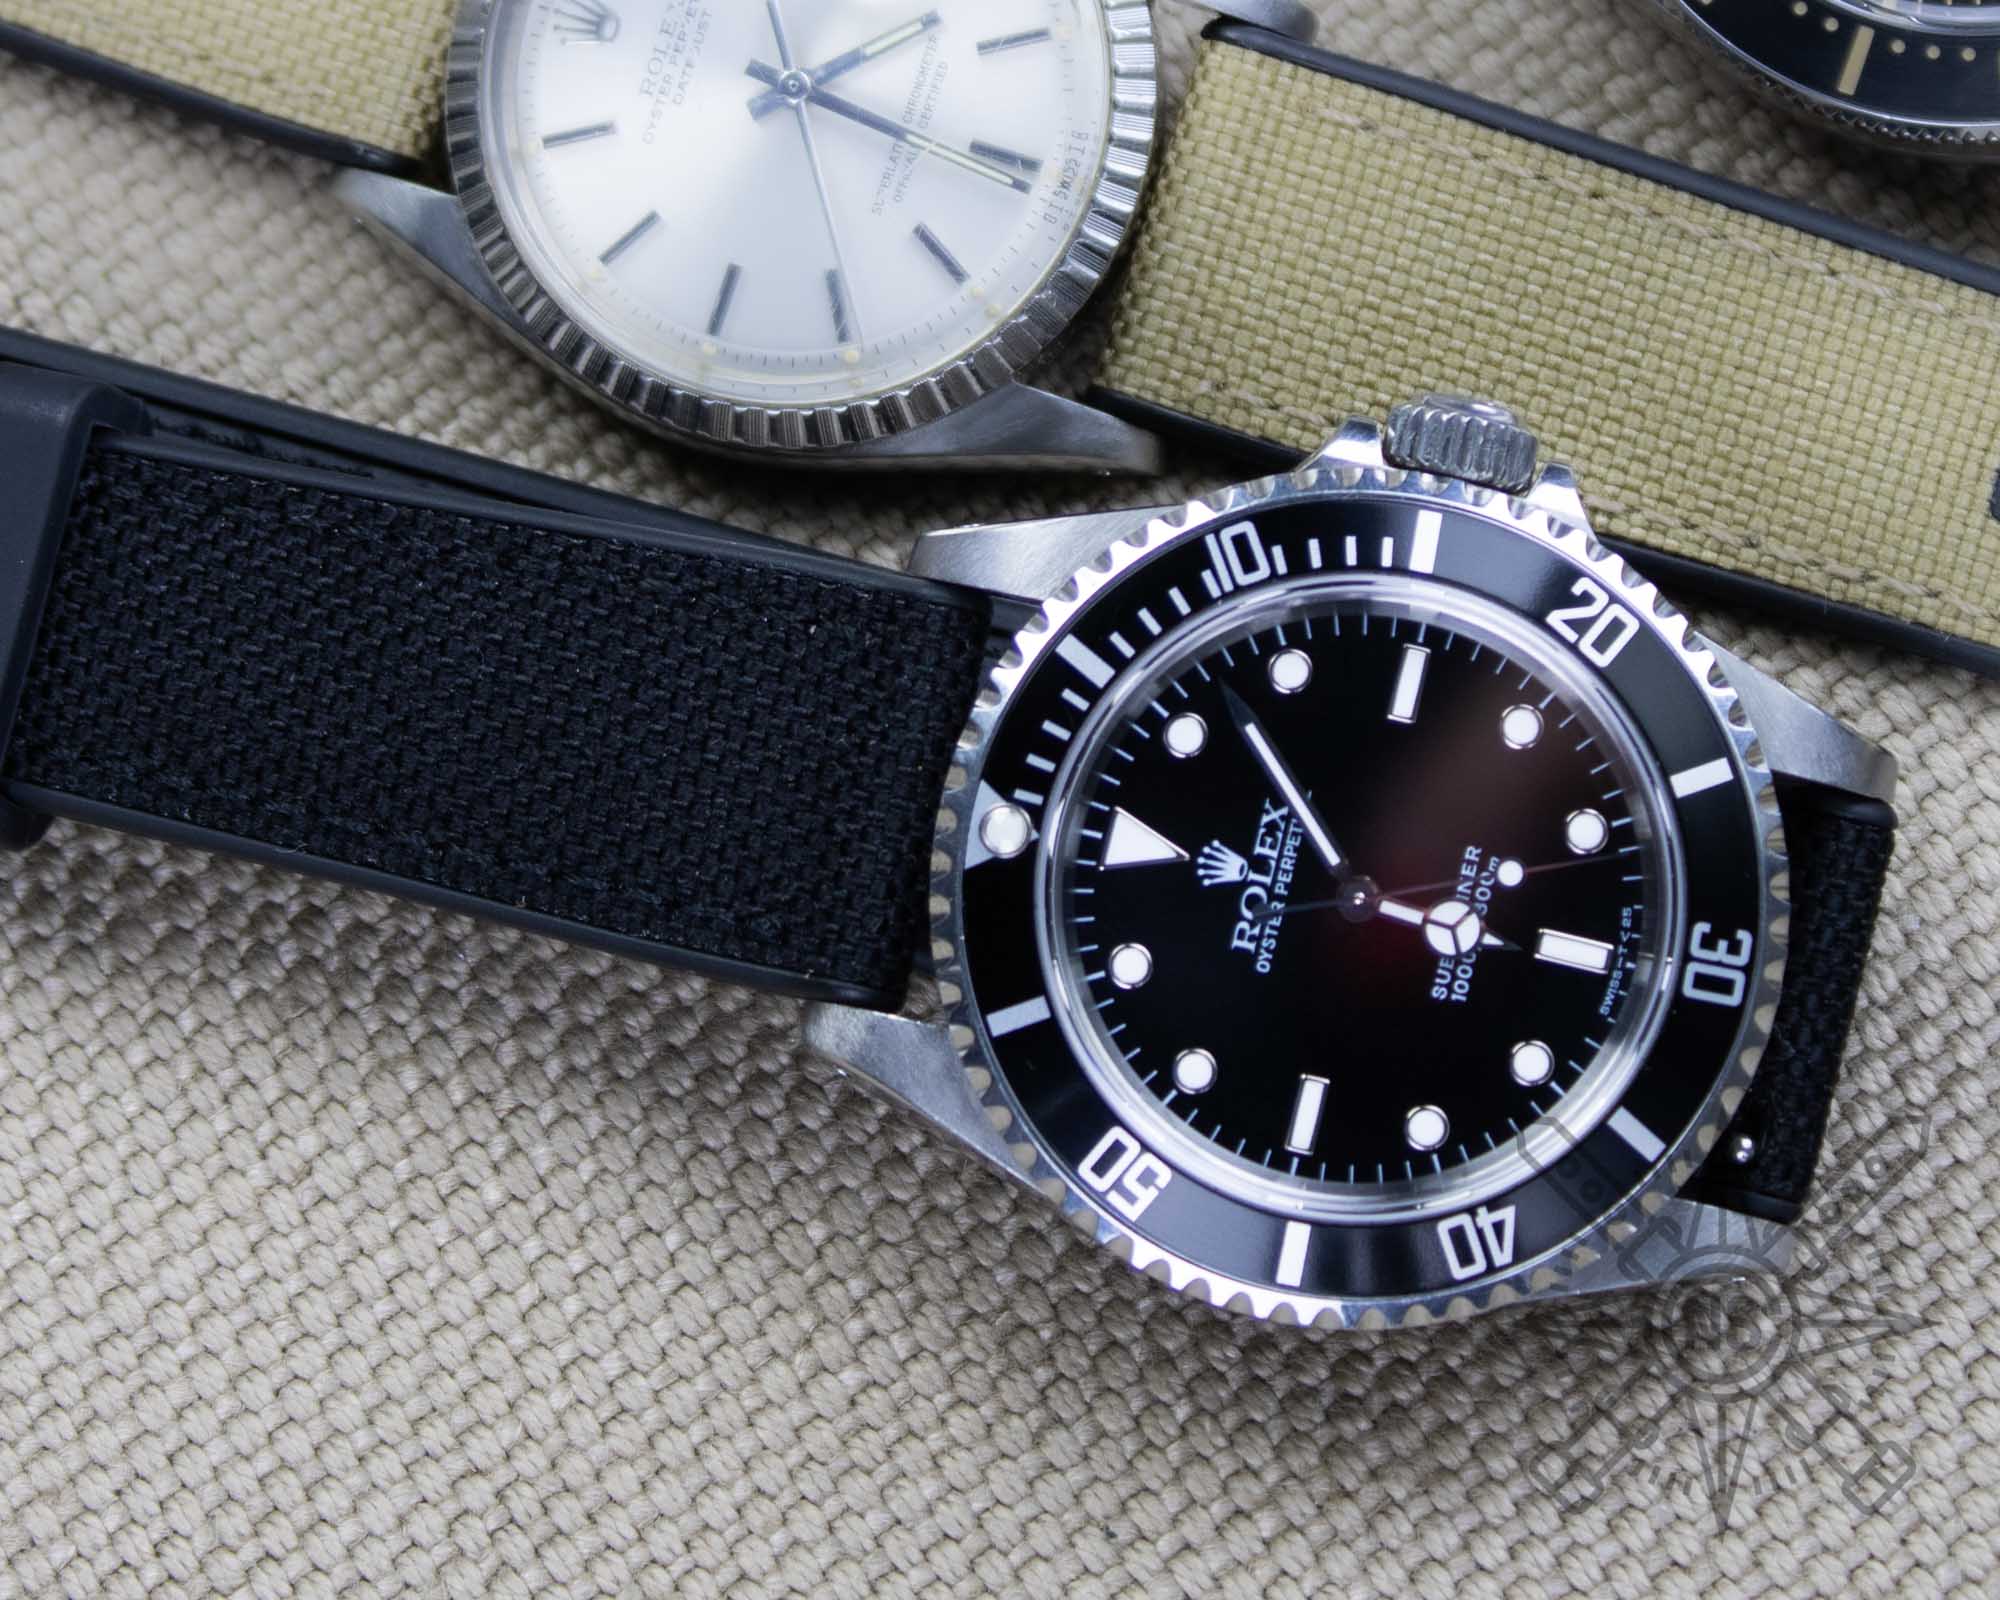 Sailcloth and rubber watch band on a Rolex Submariner